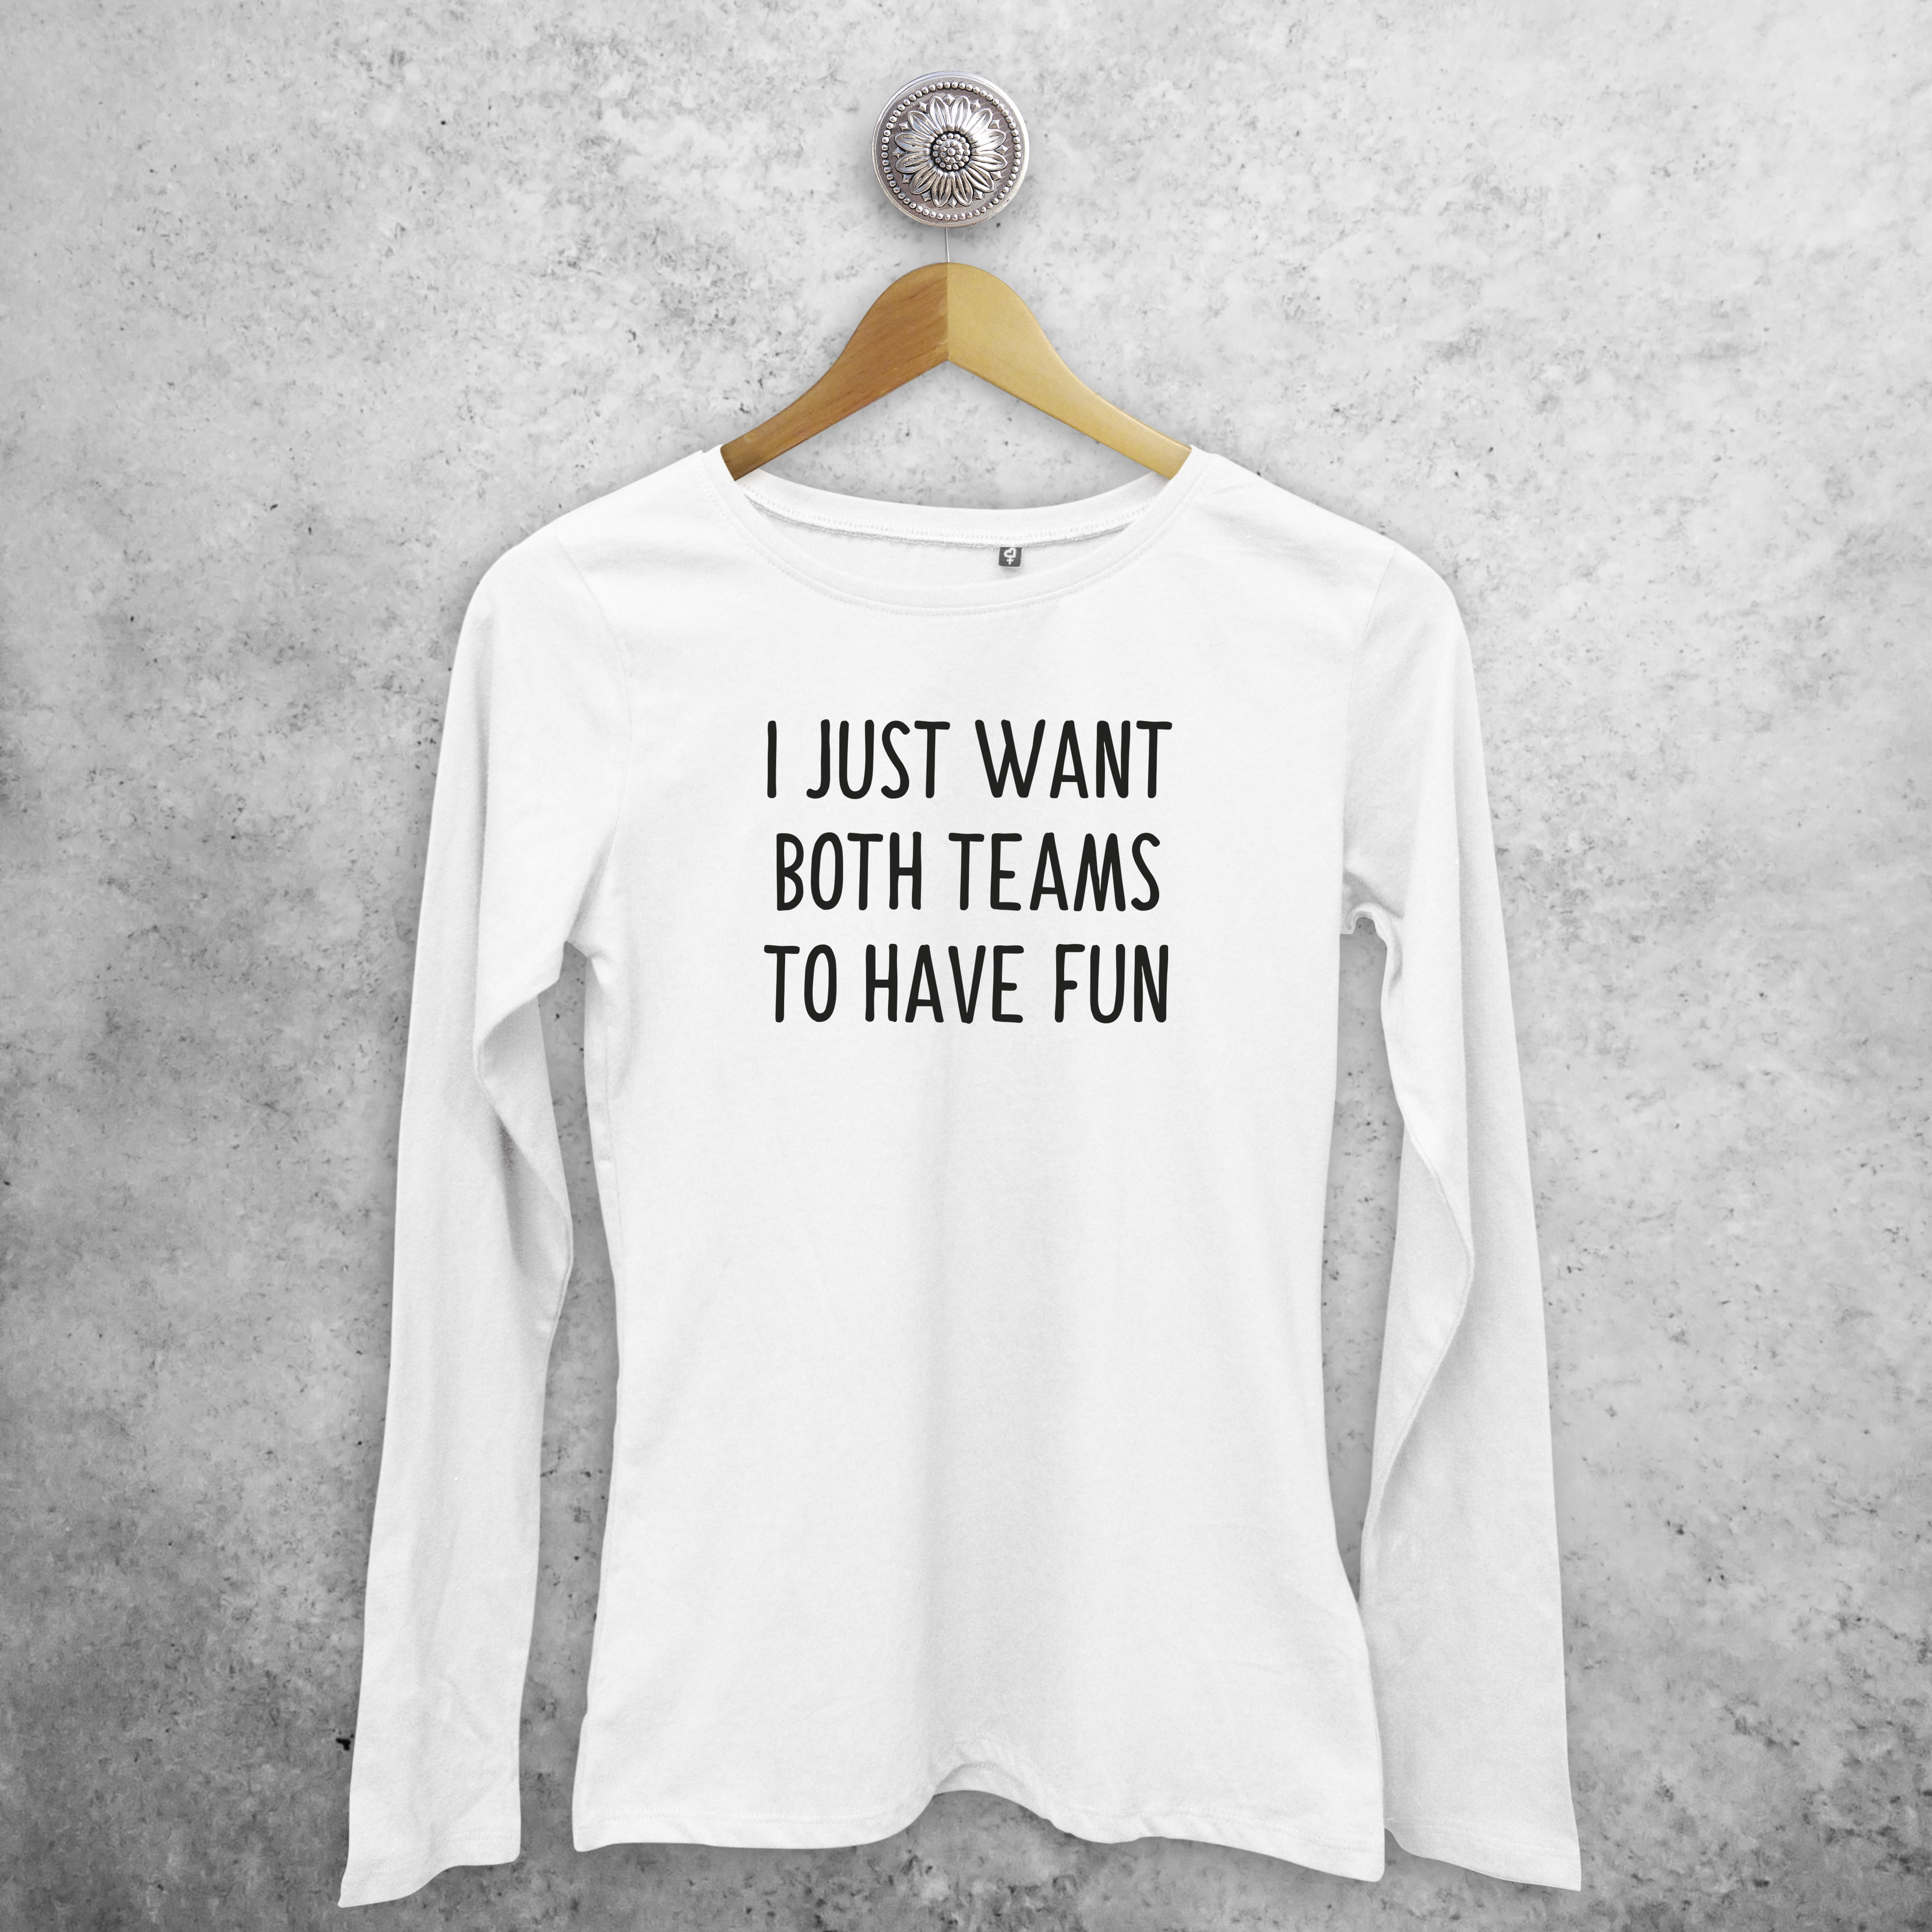 'I just want both teams to have fun' adult longsleeve shirt